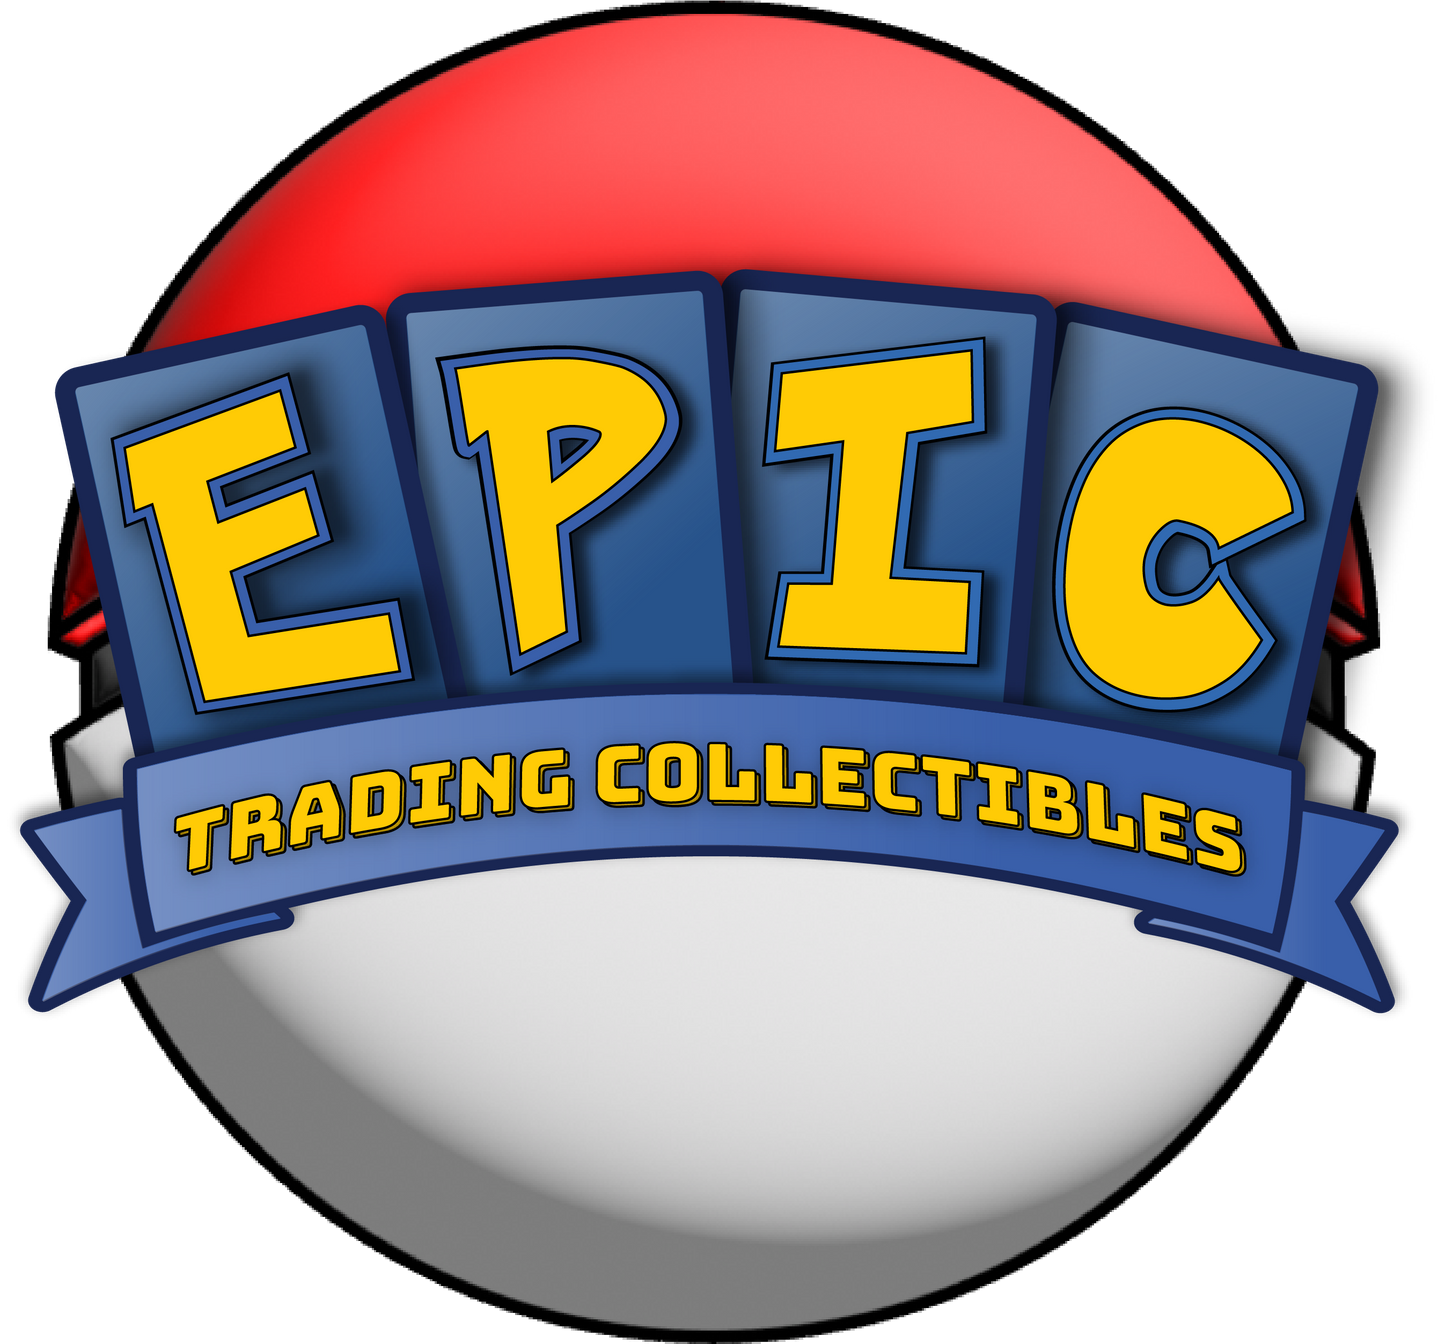 Epic Trading Collectibles Gift Card - $10.00